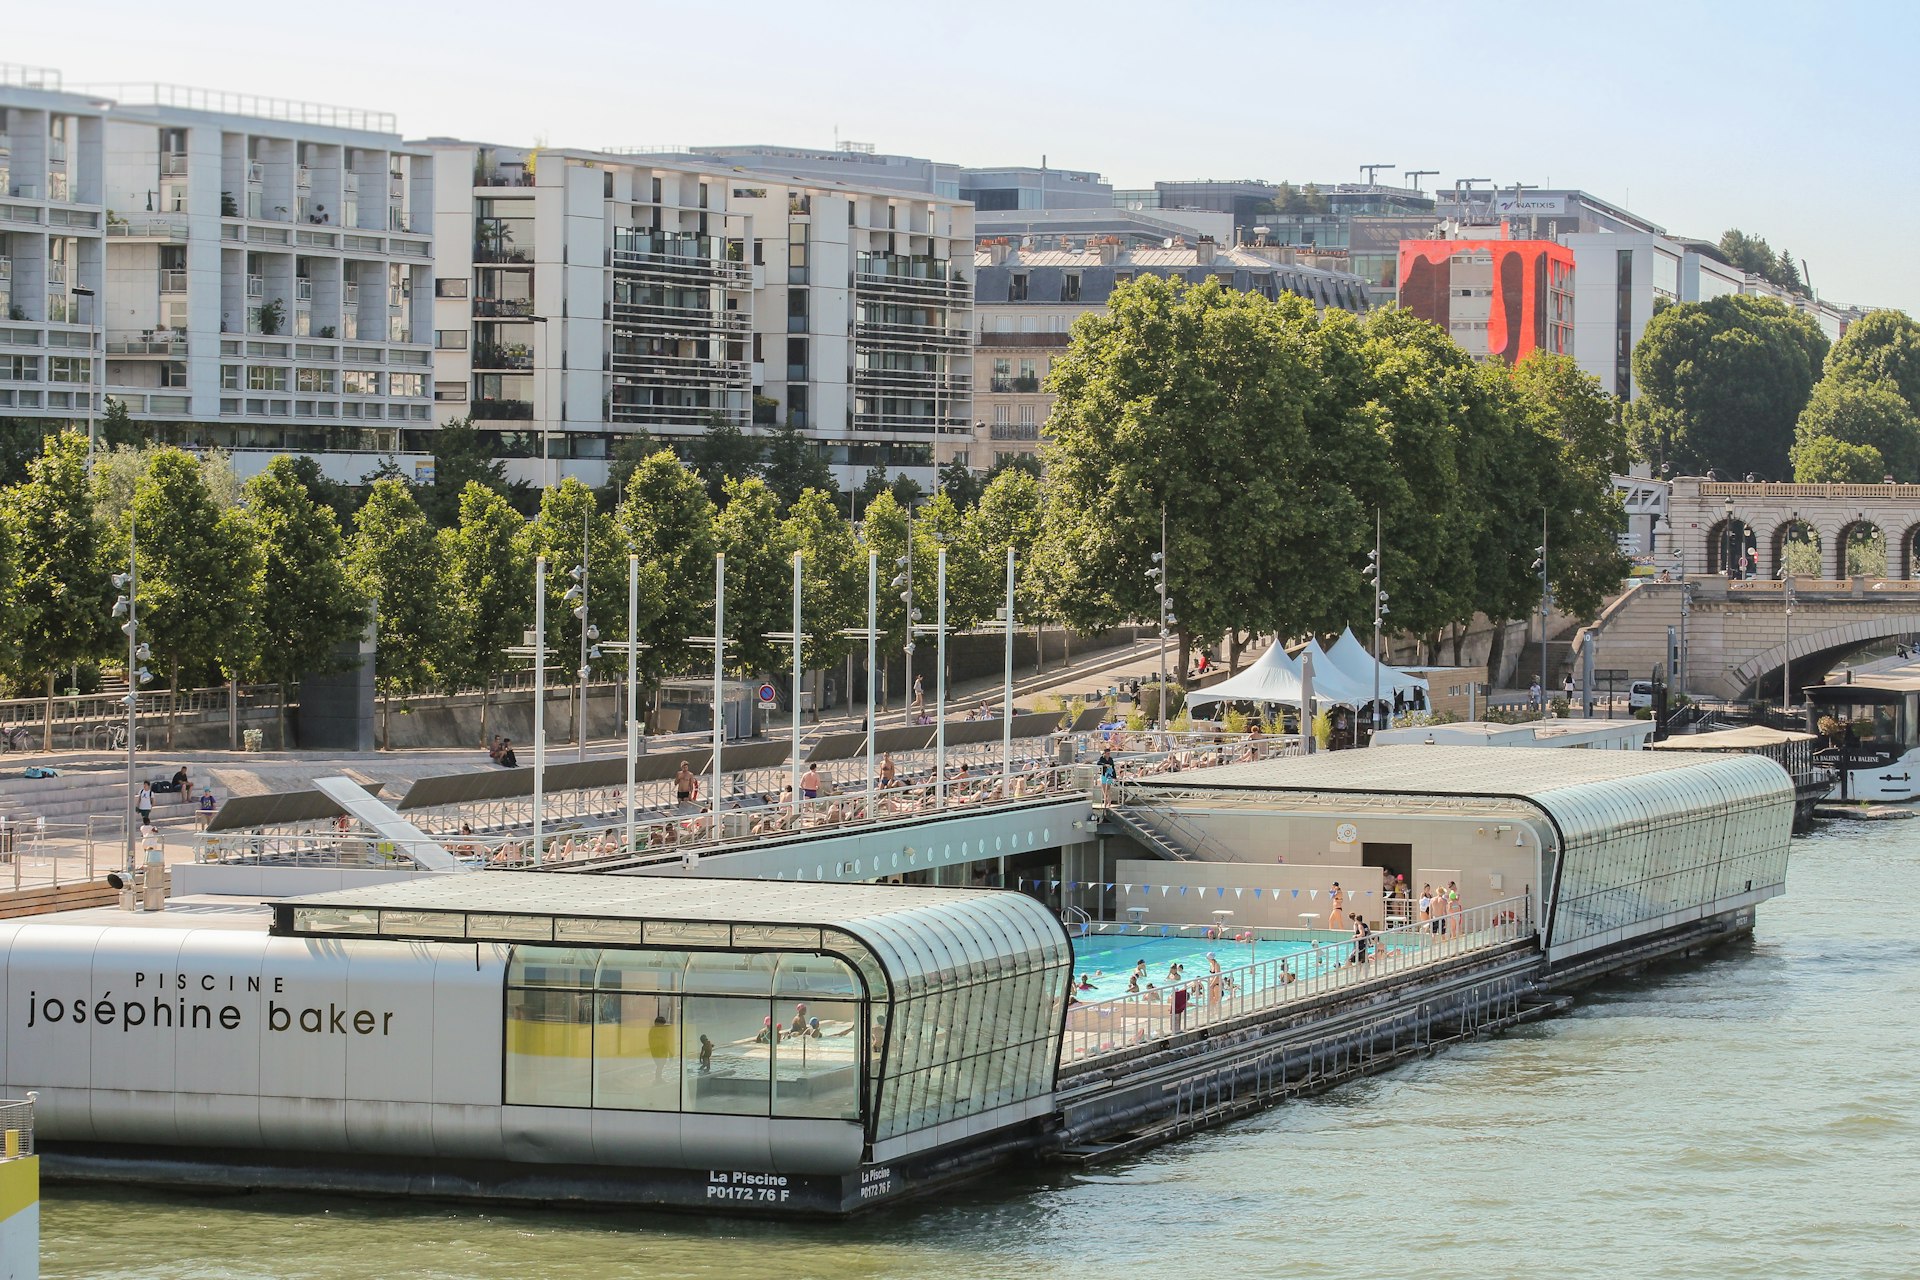 An open-air swimming pool complex floating on the edge of a river